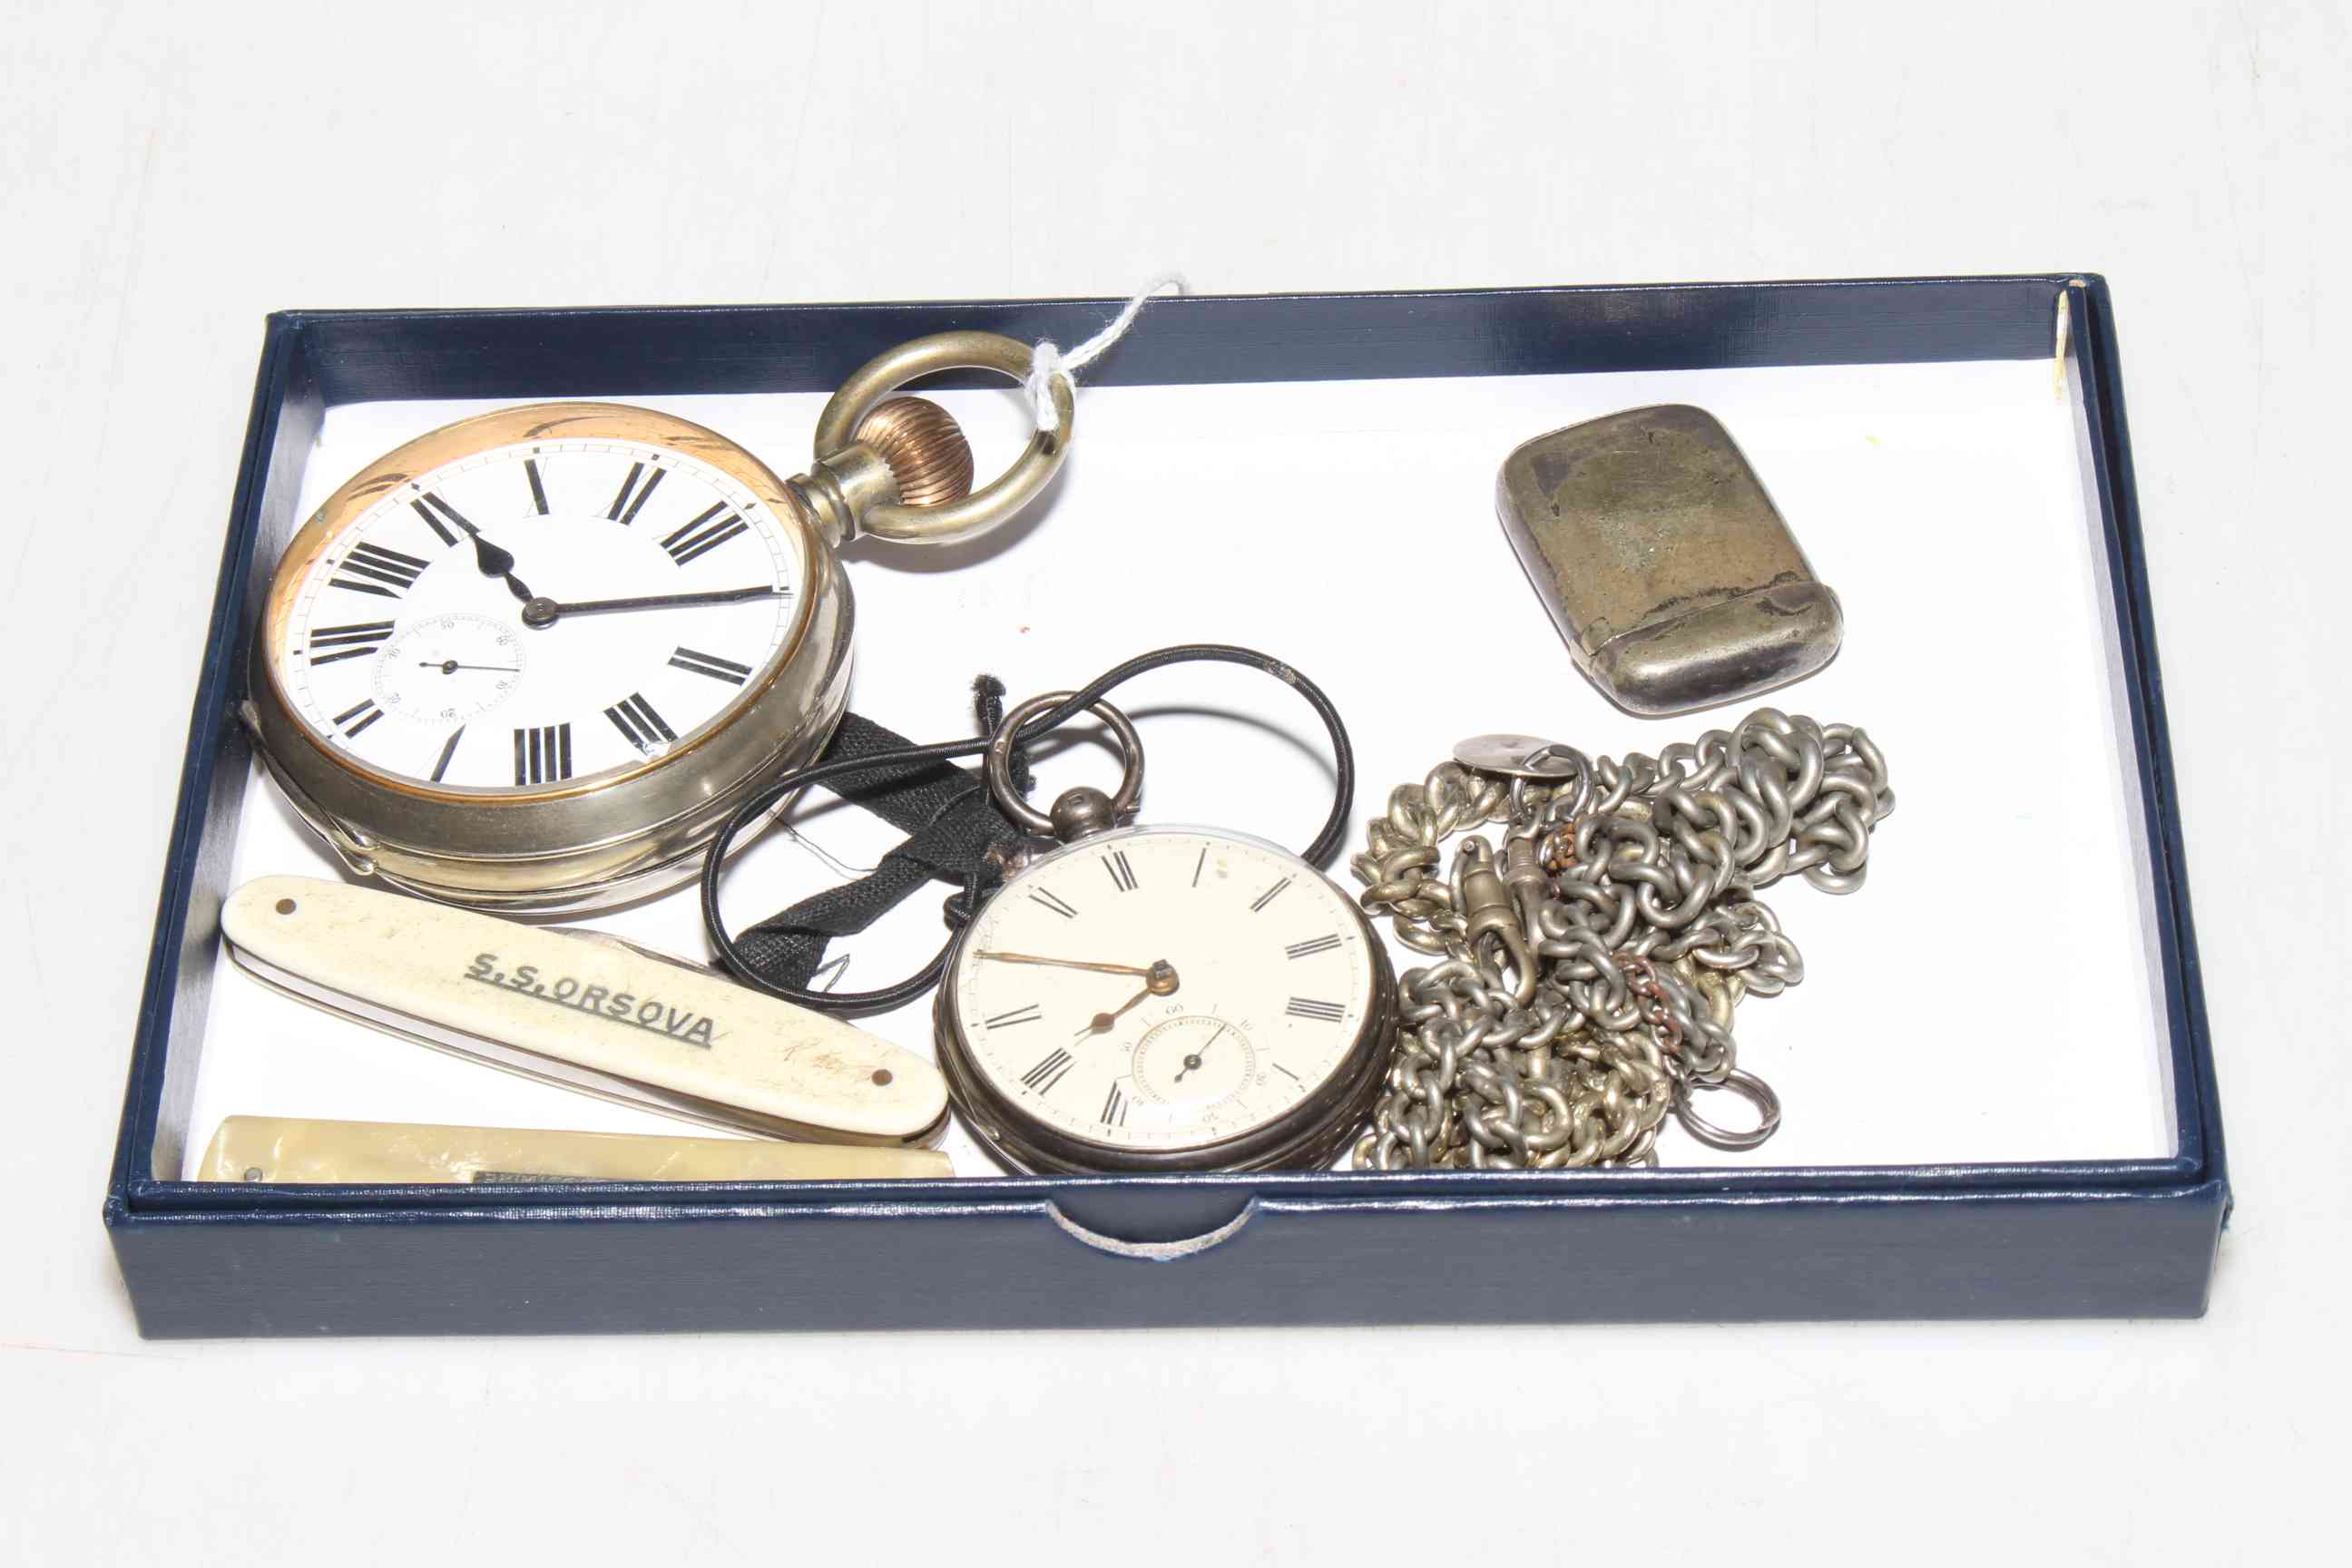 Large pocket watch, smaller silver pocket watch, albert chains, vesta and two pocket knives.